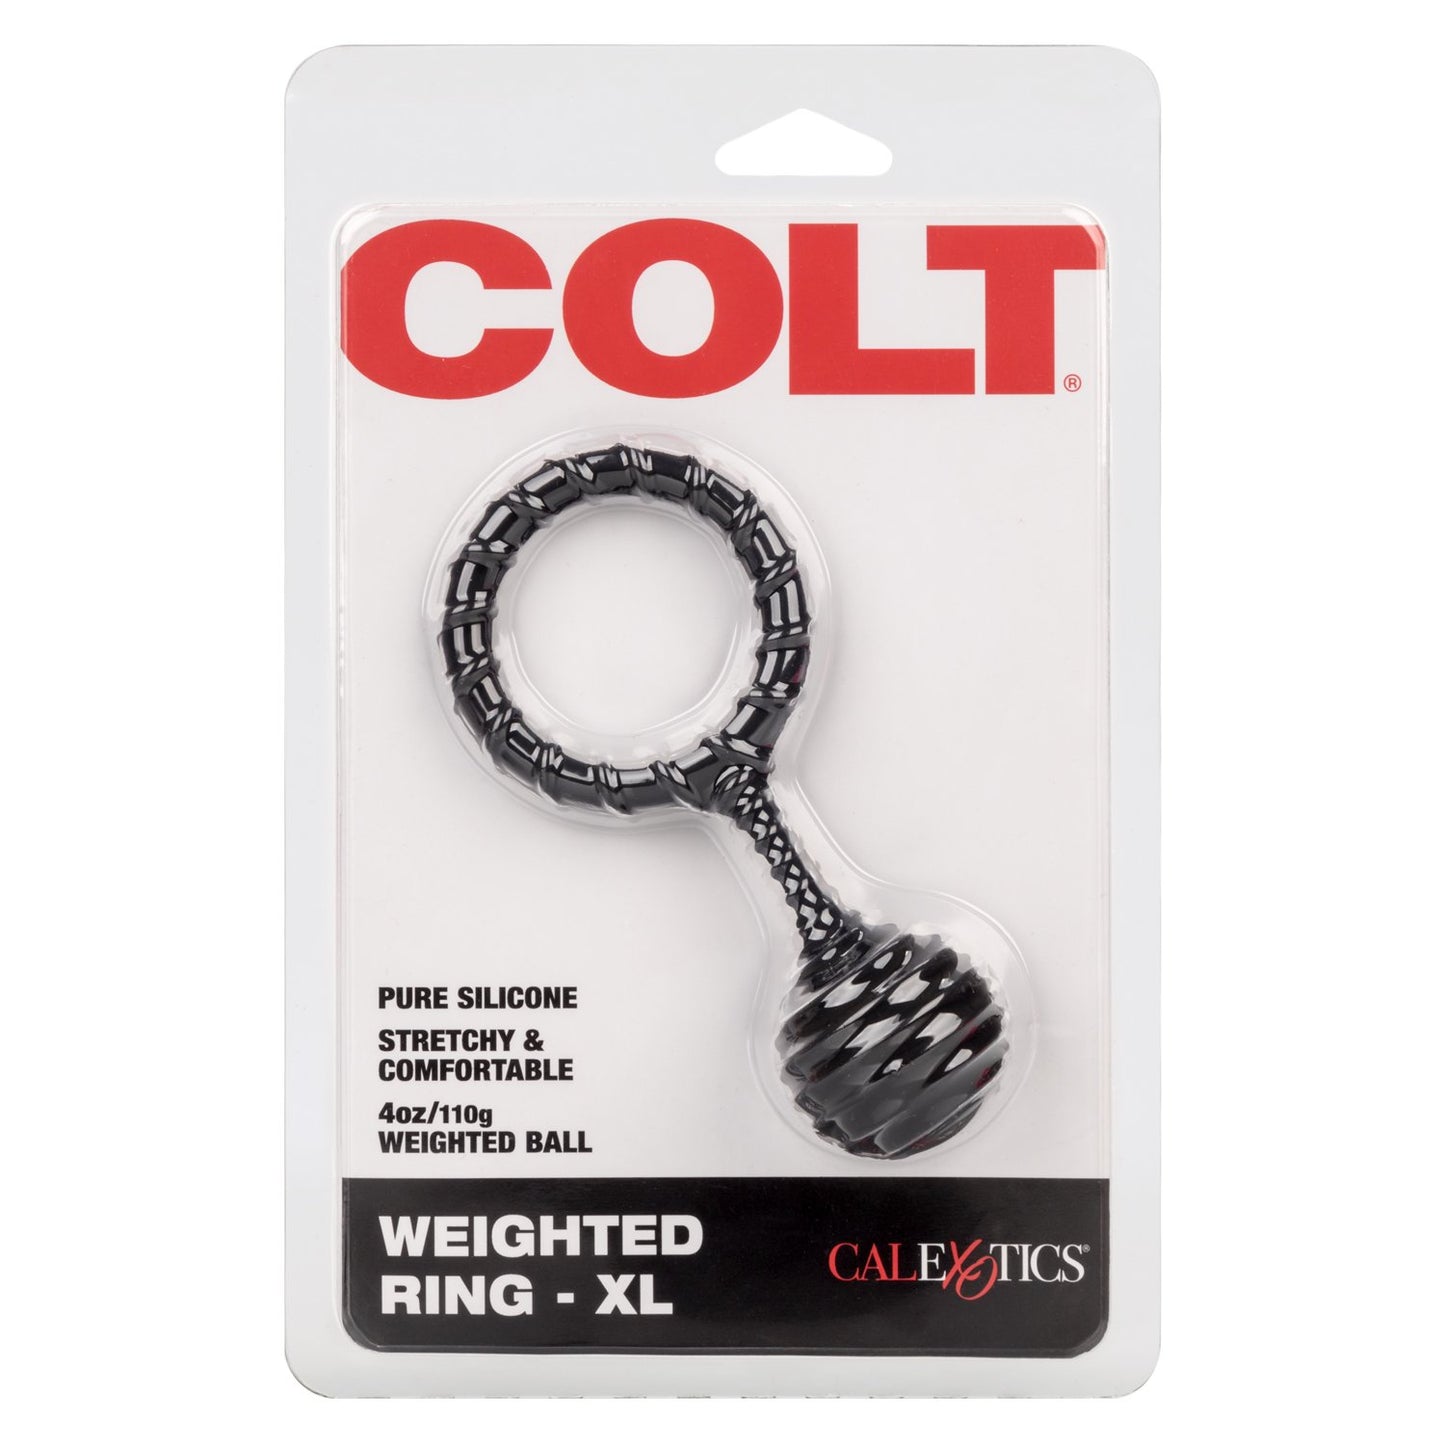 COLT Weighted Ring - XL